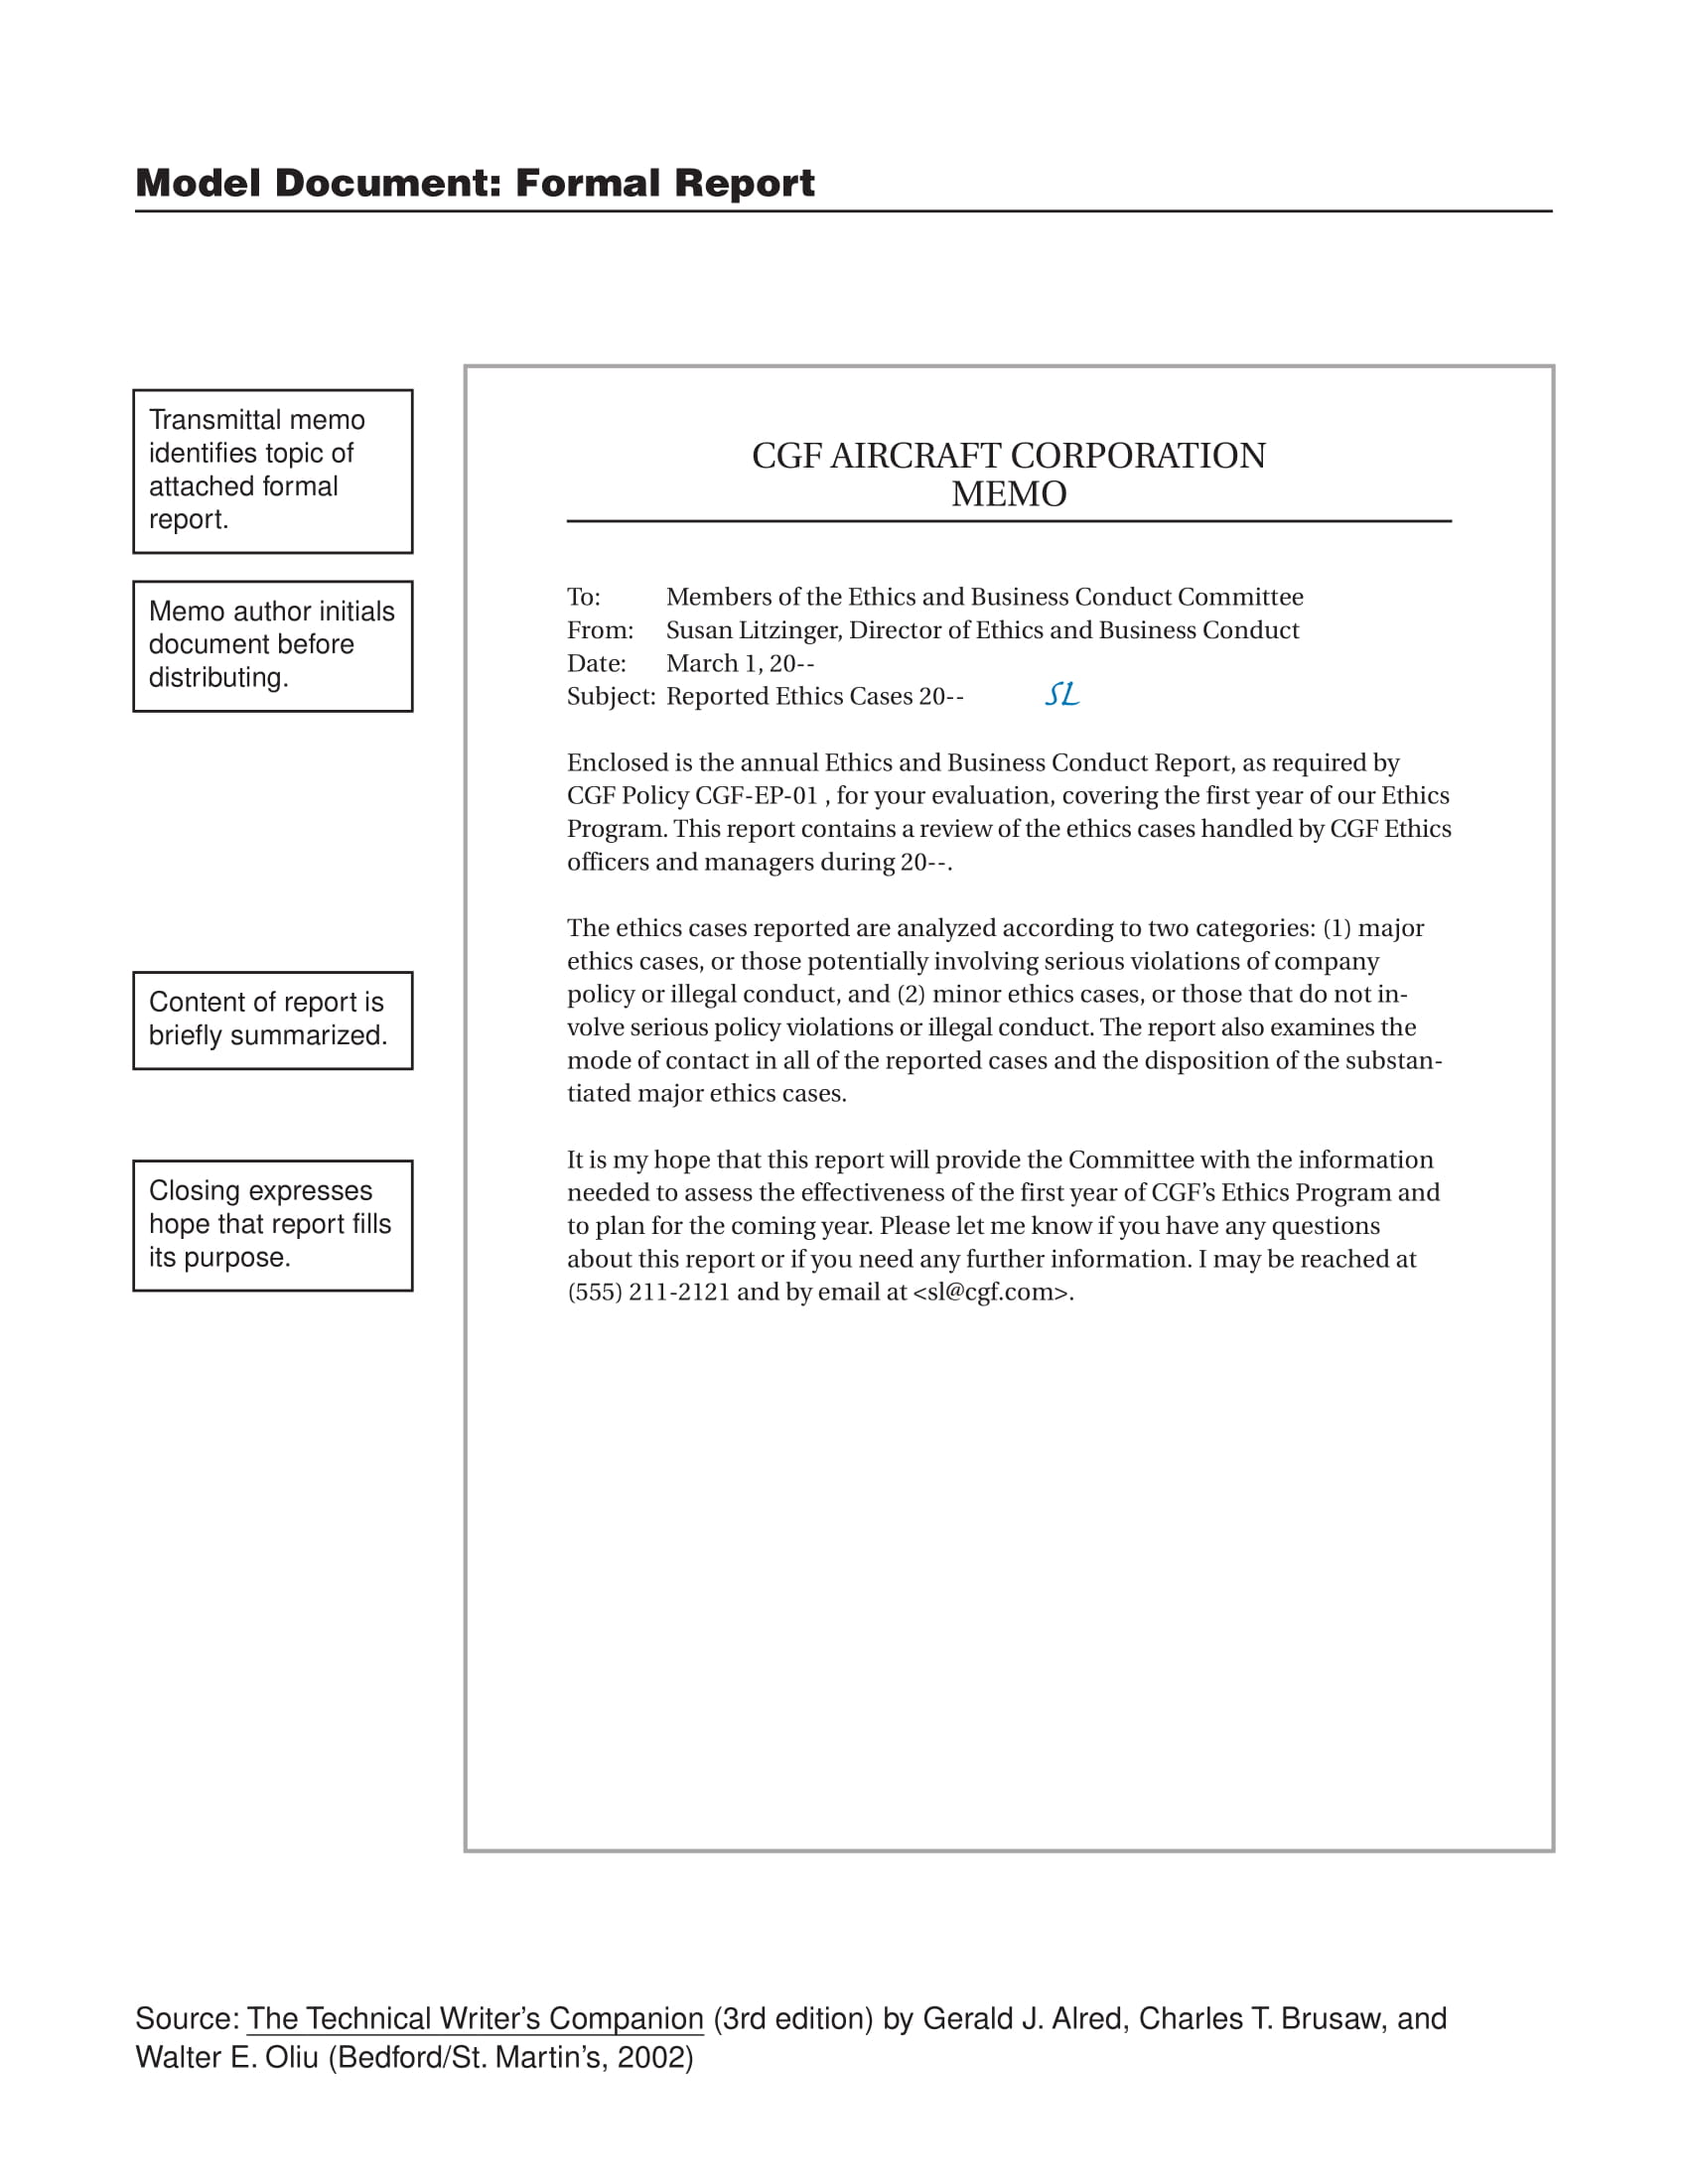 Annual Ethics And Business Conduct Report Example 01 